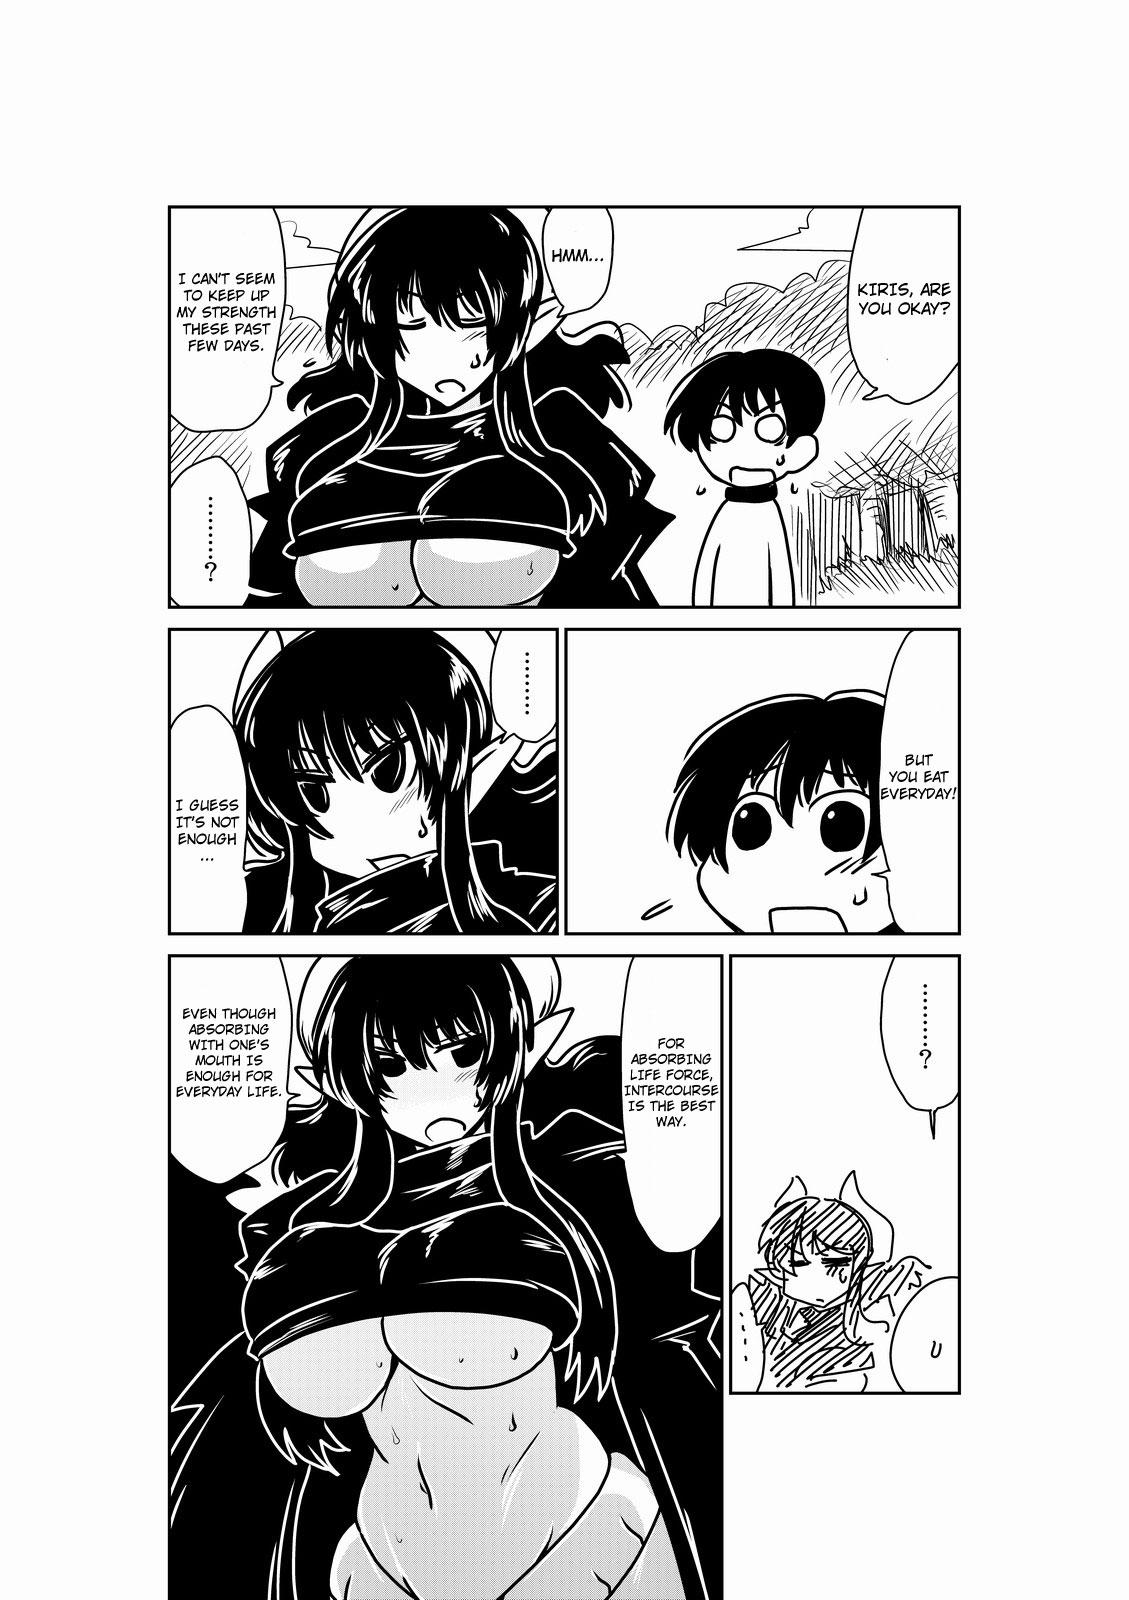 Hymen Succubus Kenshi to Obentou. | Lunch with a Succubus Swordswoman. Dick - Page 7